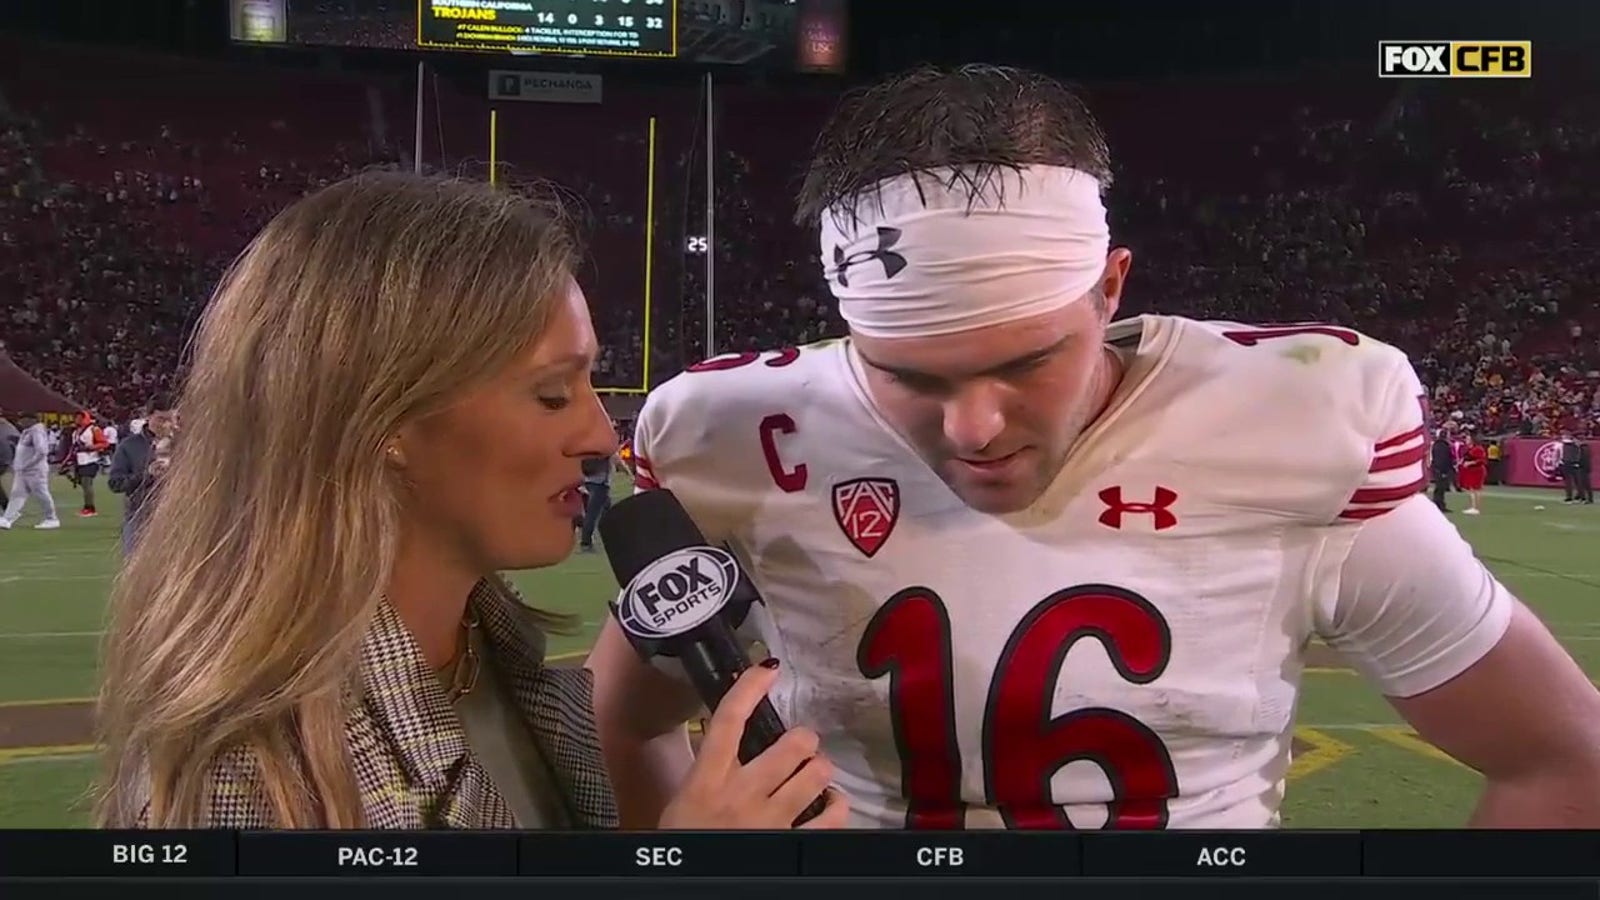 'Trusting in your teammates and letting it rip' – Utah QB Bryson Barnes talks about the fight it took to win over USC